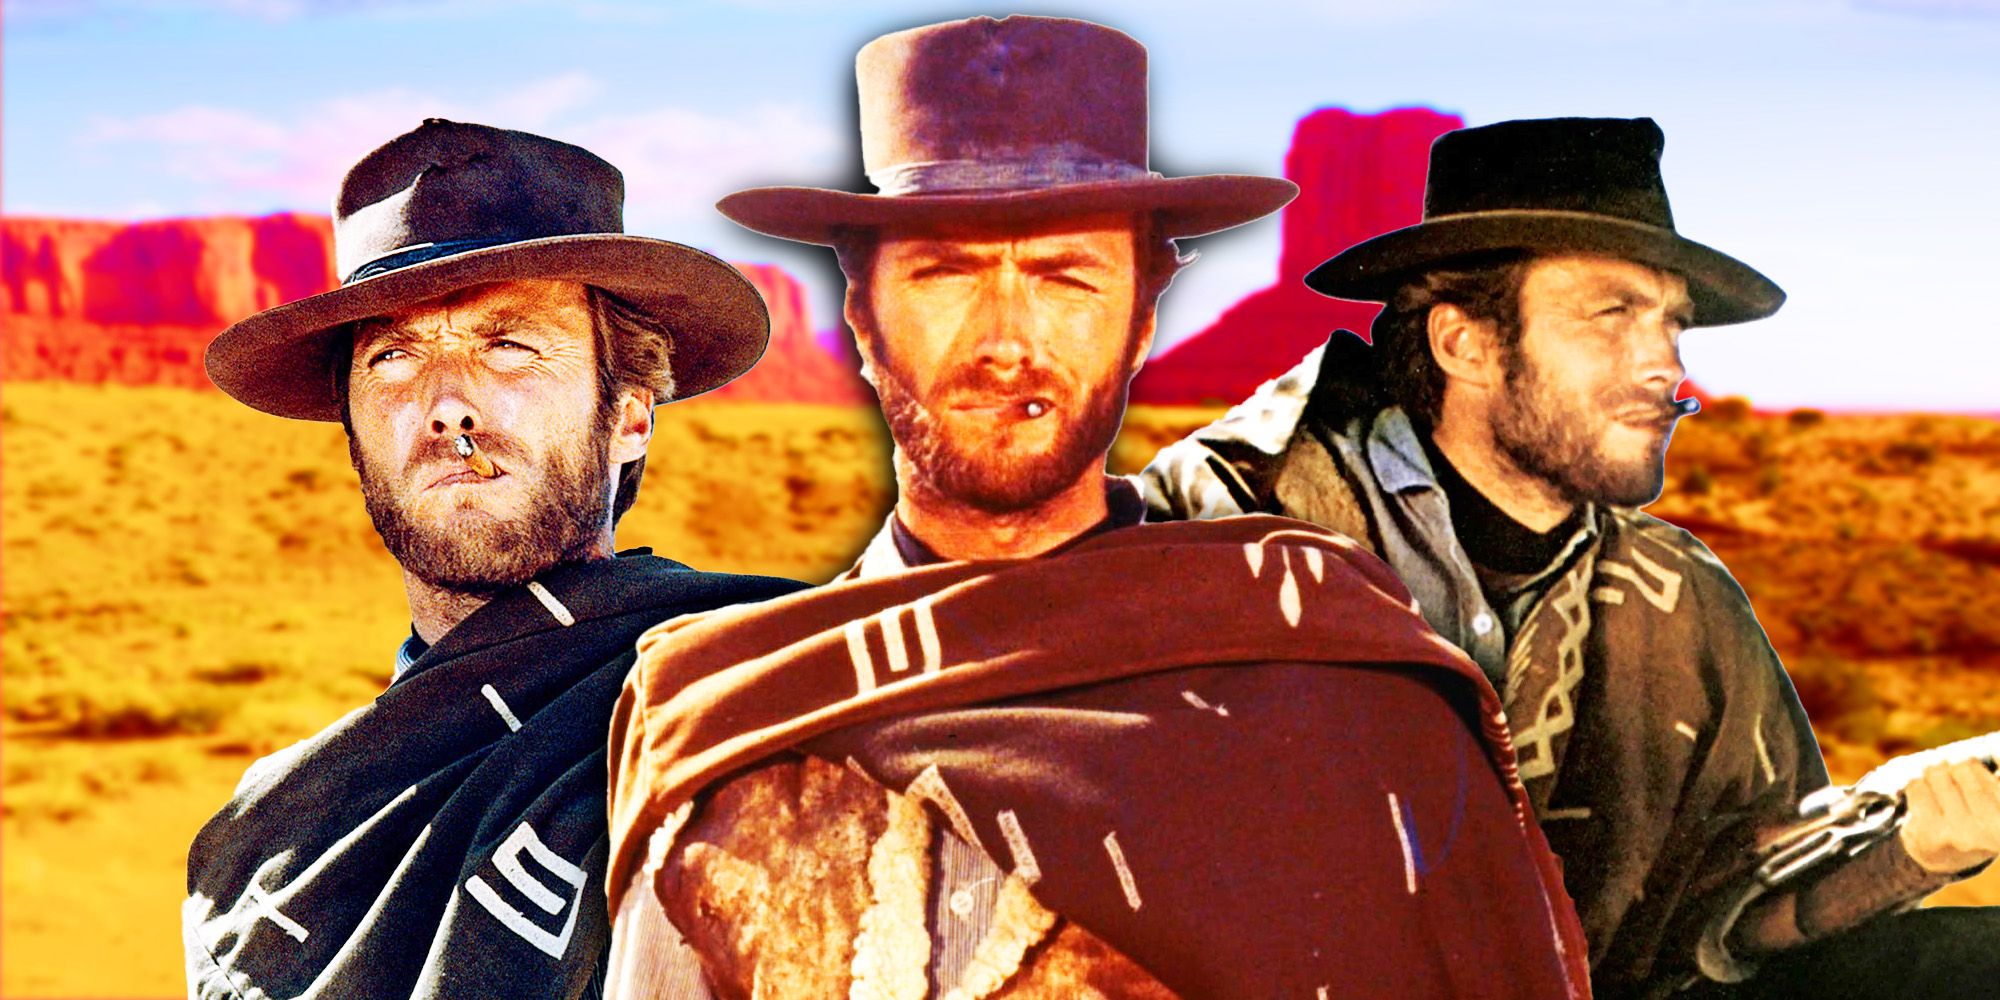 Clint Eastwood in The Man With No Name Trilogy